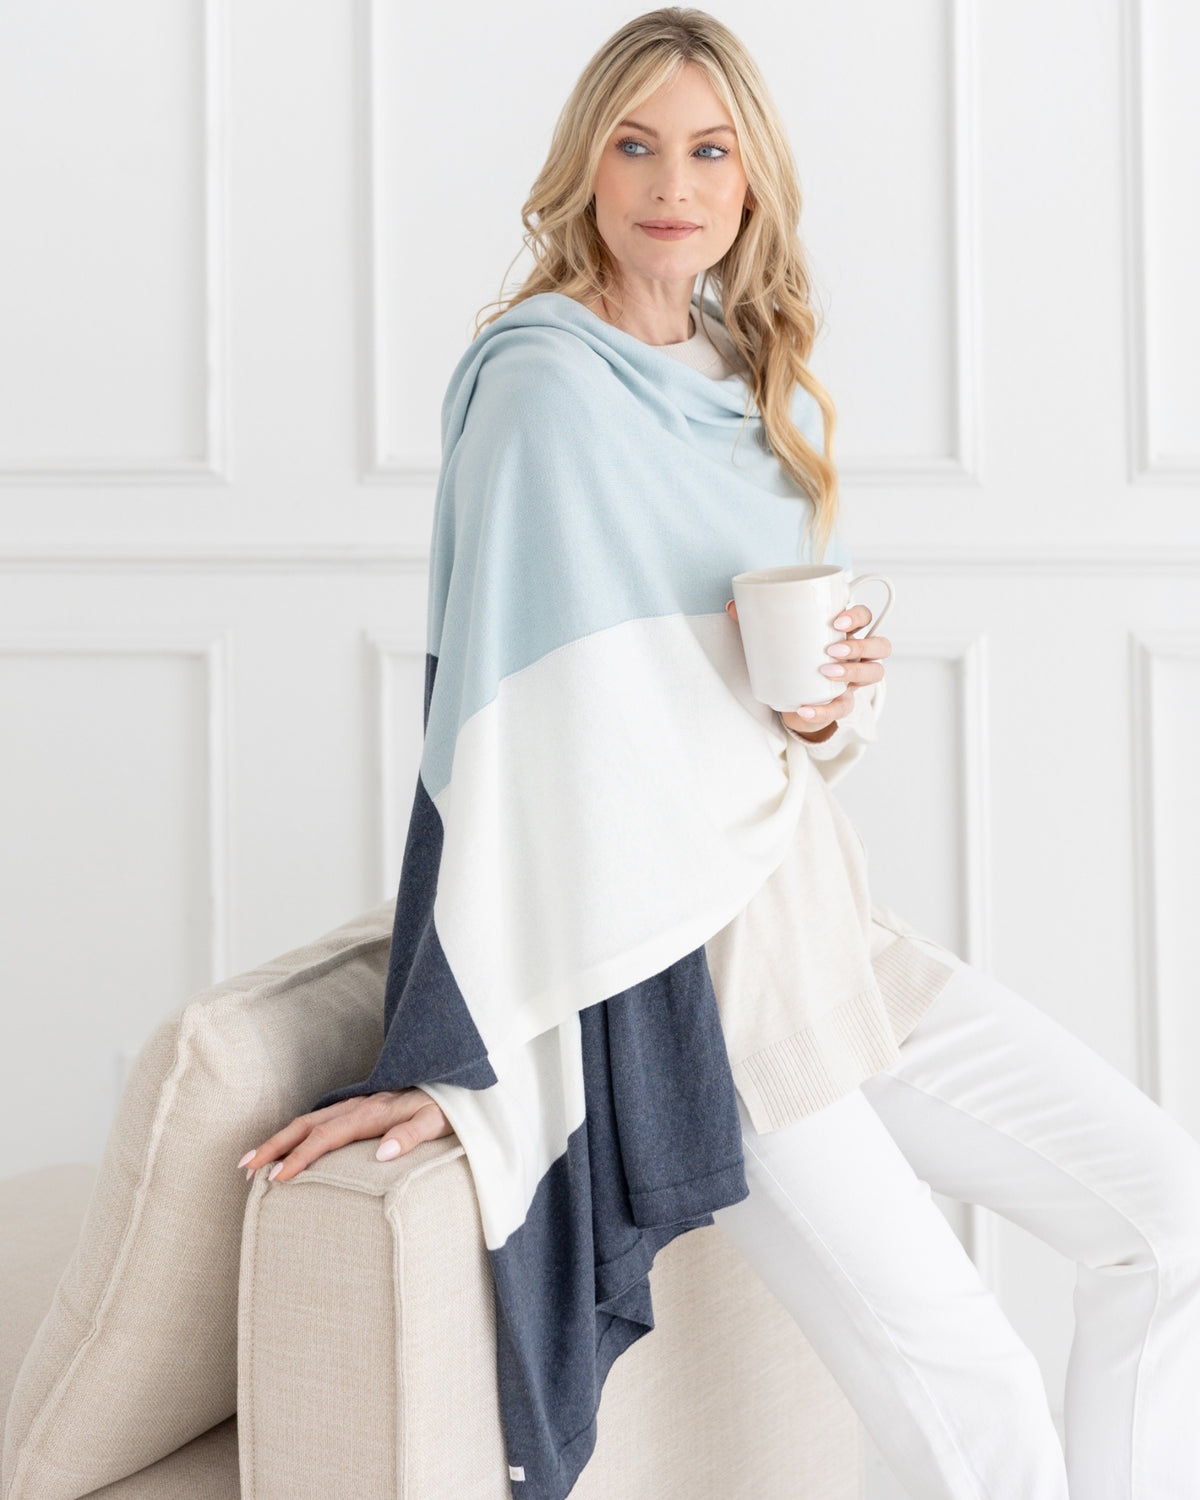 Woman leaning on side of sofa wearing the Dreamsoft Travel Scarf in Sky Blue Colorblock which is a light blue, gray and cream scarf, while holding her coffee mug